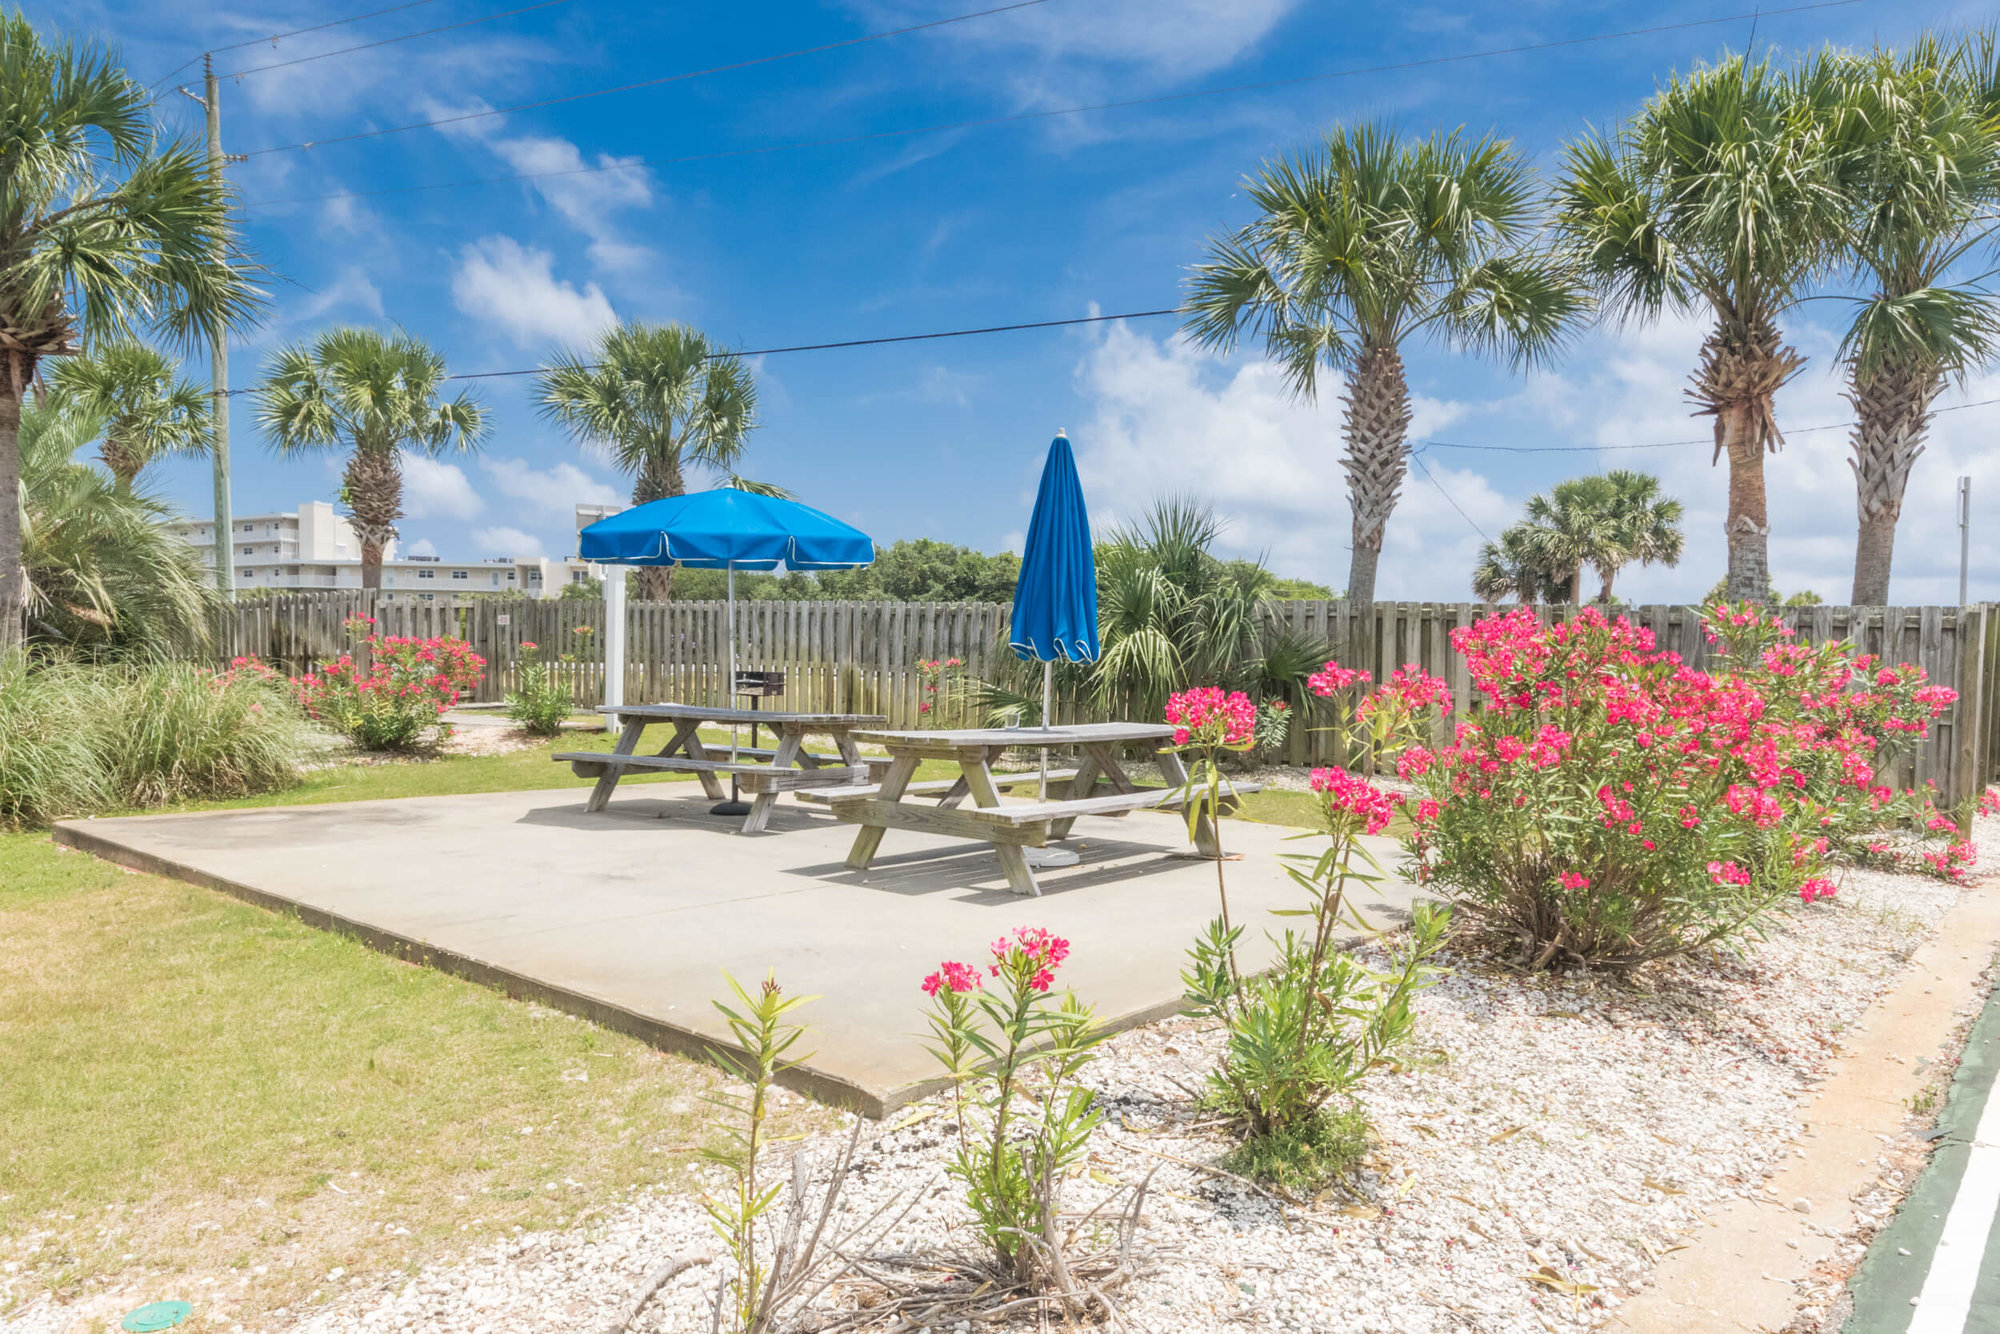 Sundown condos in Perdido Key grilling and picnic area surrounded by oleander and palm trees